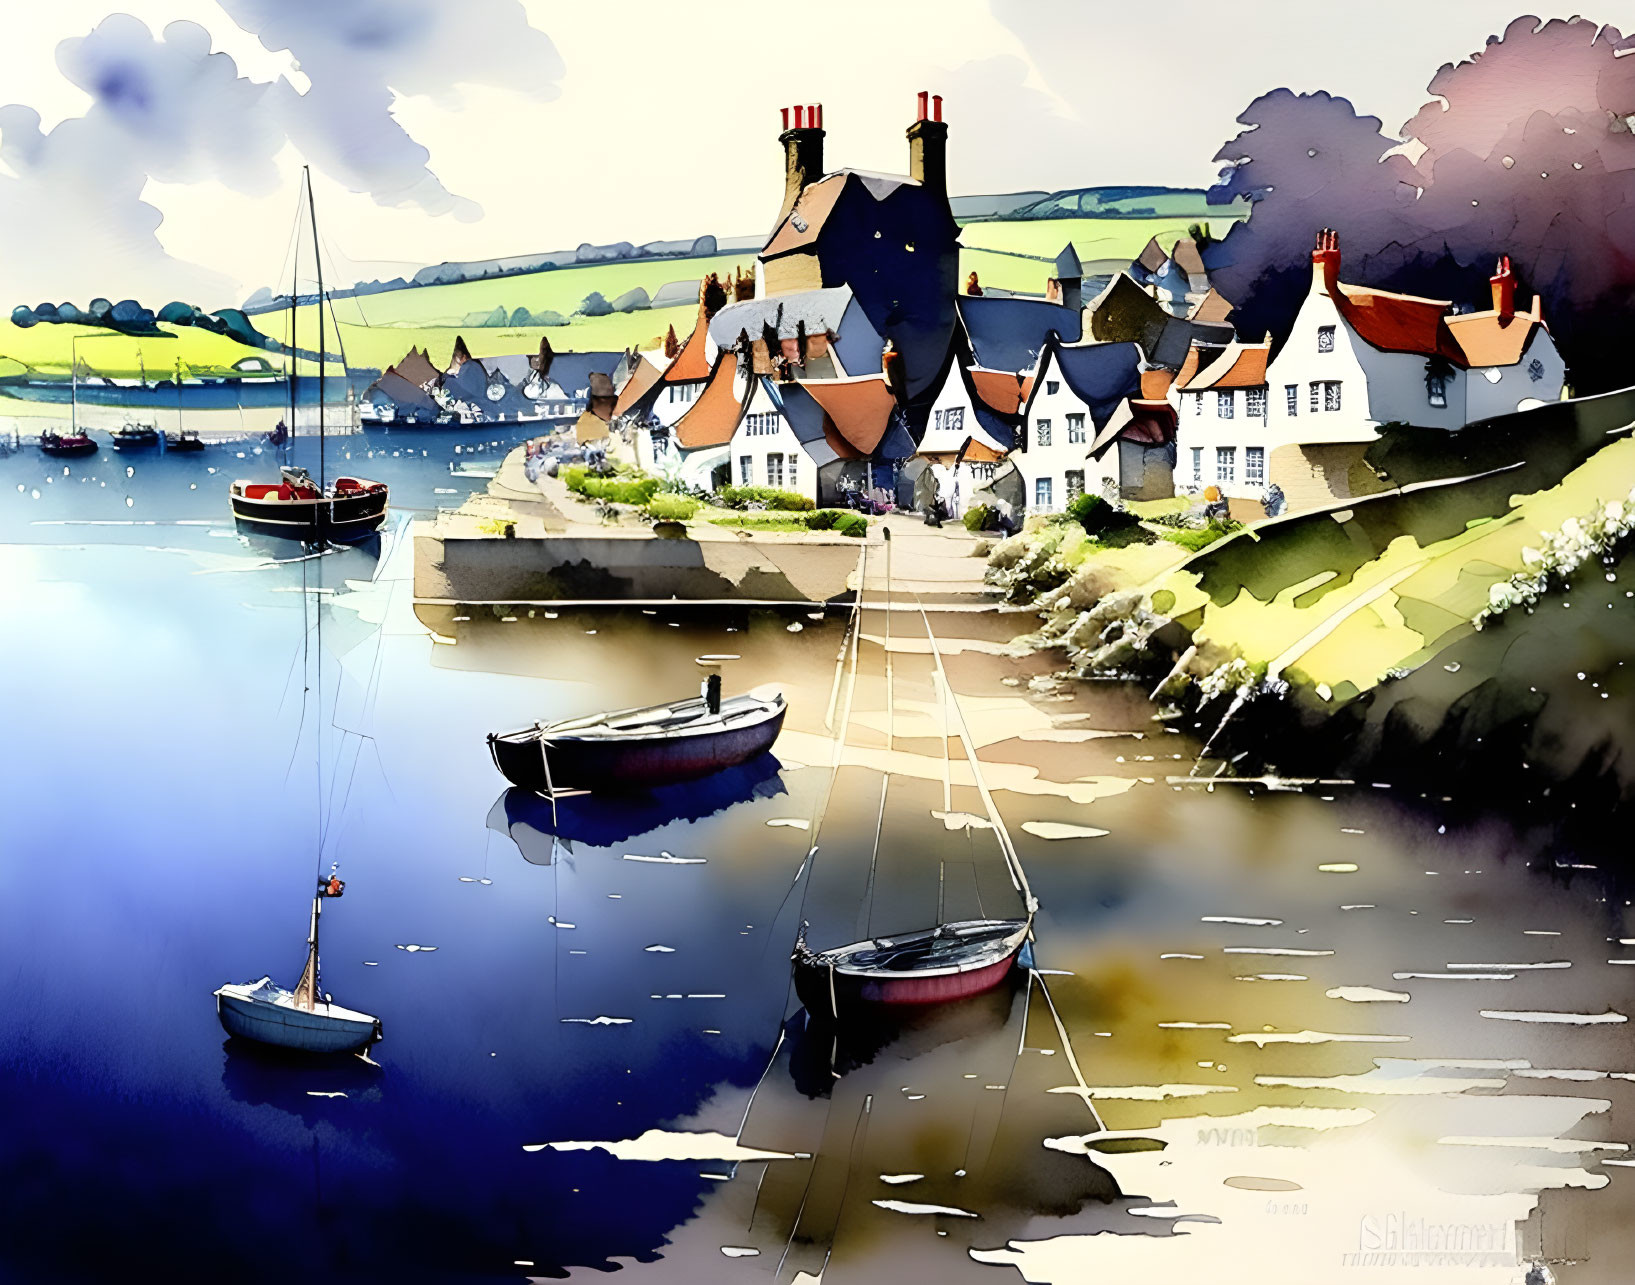 Serene coastal village watercolor painting with traditional houses, boats, and hills